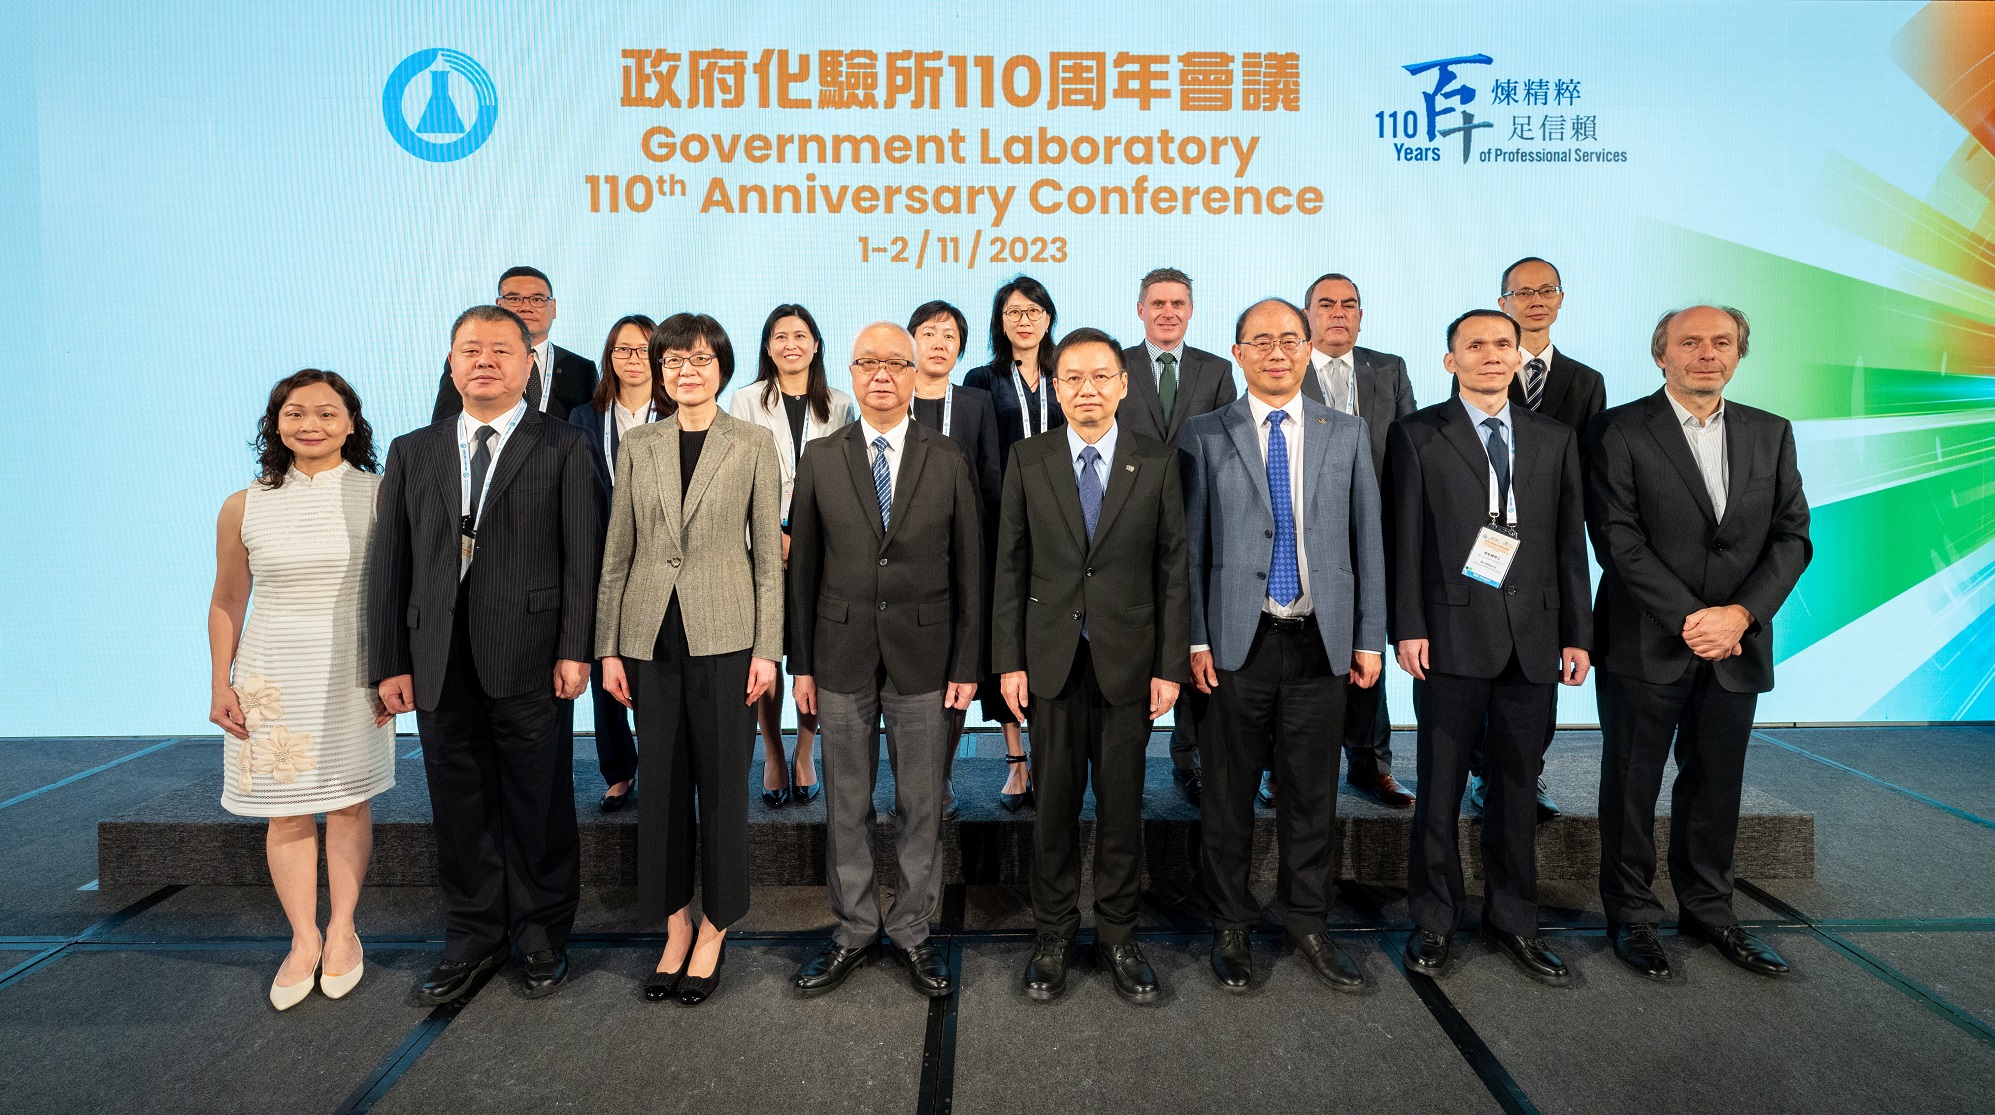 Photos 6: Group photos of distinguished speakers presenting on 2 November 2023.